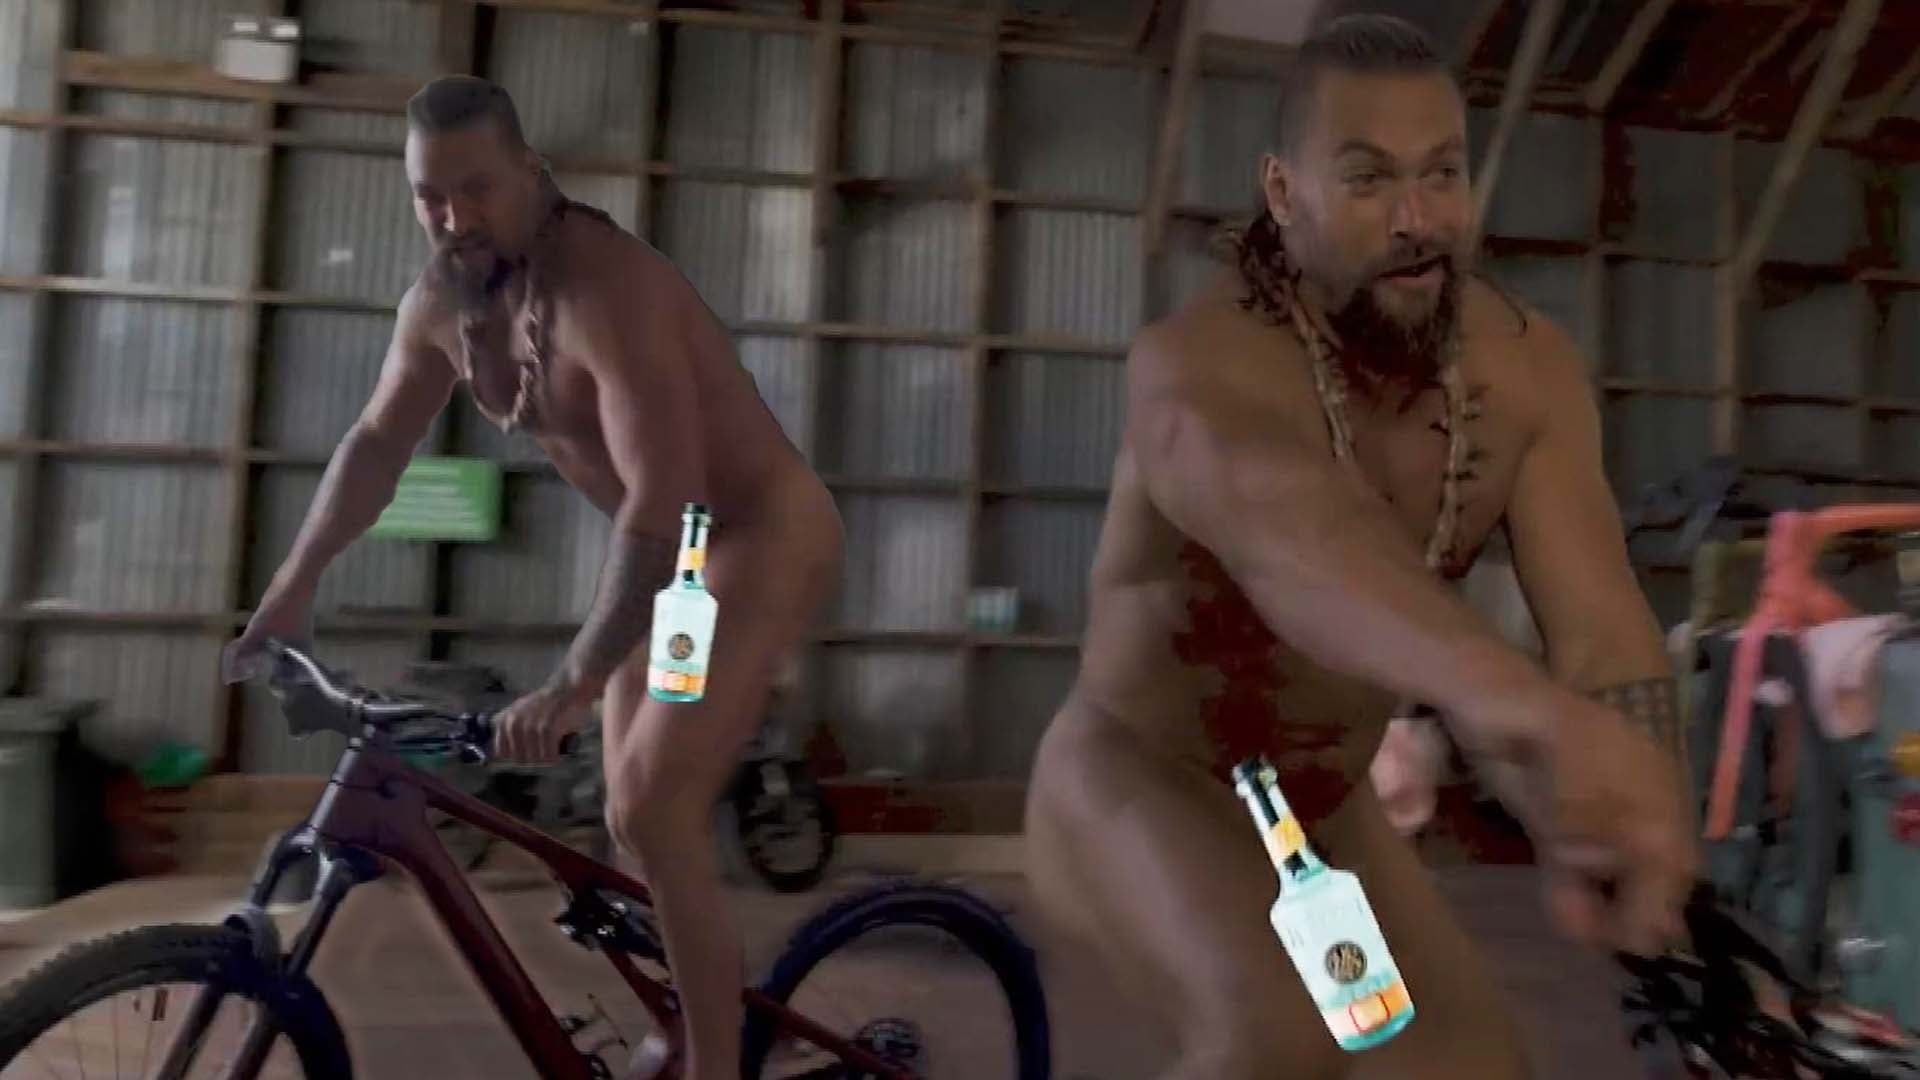 Jason Momoa Rides Bicycle Nude During Tour of His Private pic